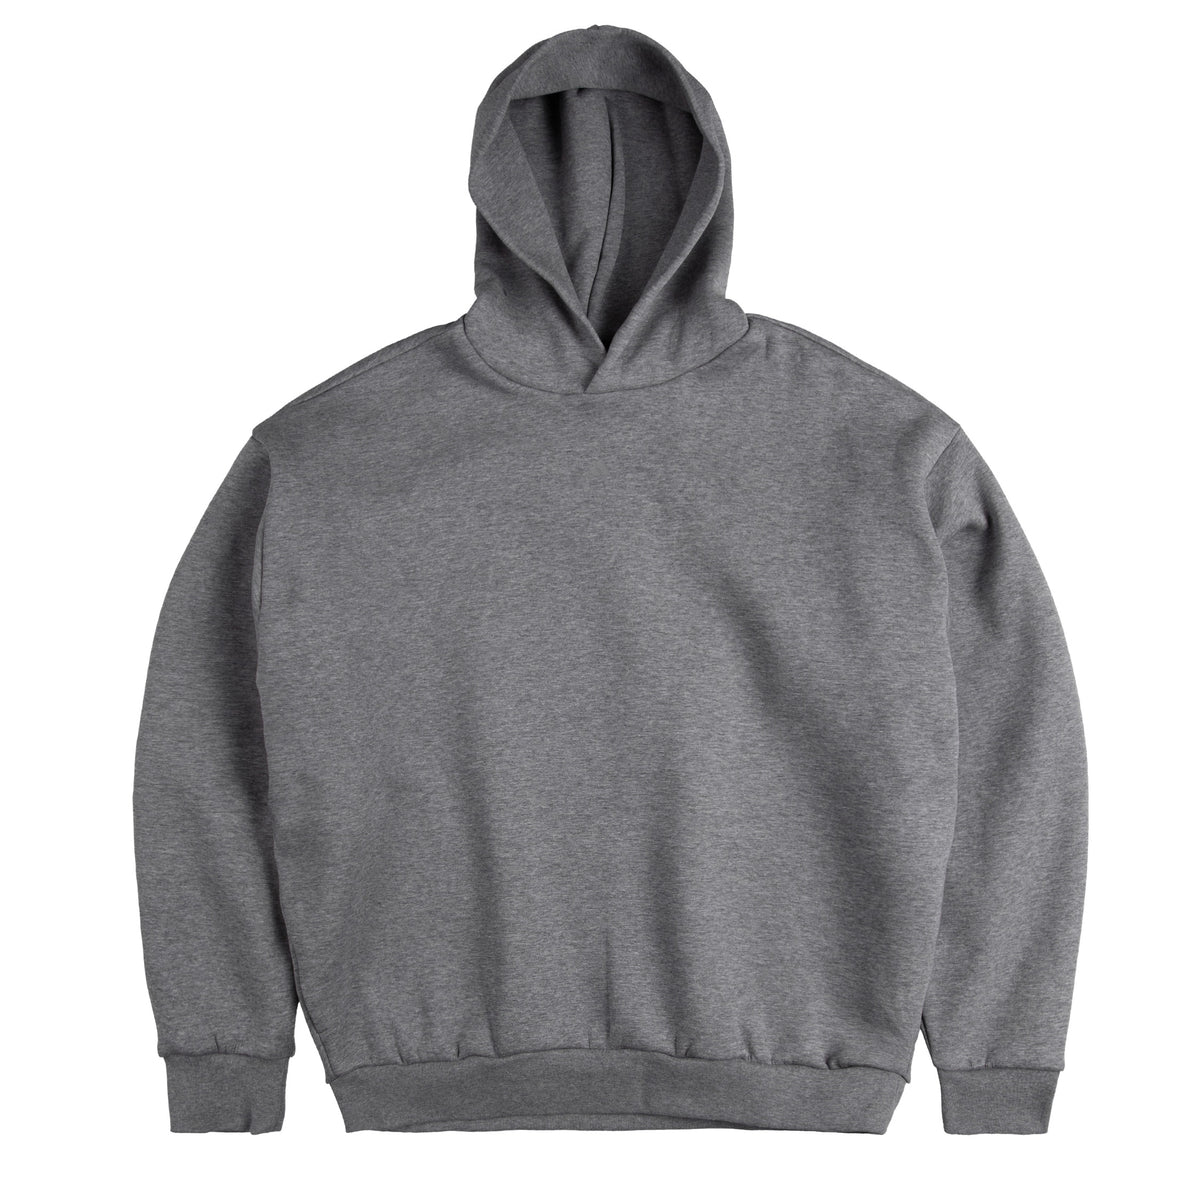 Adidas Basketball Heather Hoodie – buy now at Asphaltgold Online Store!